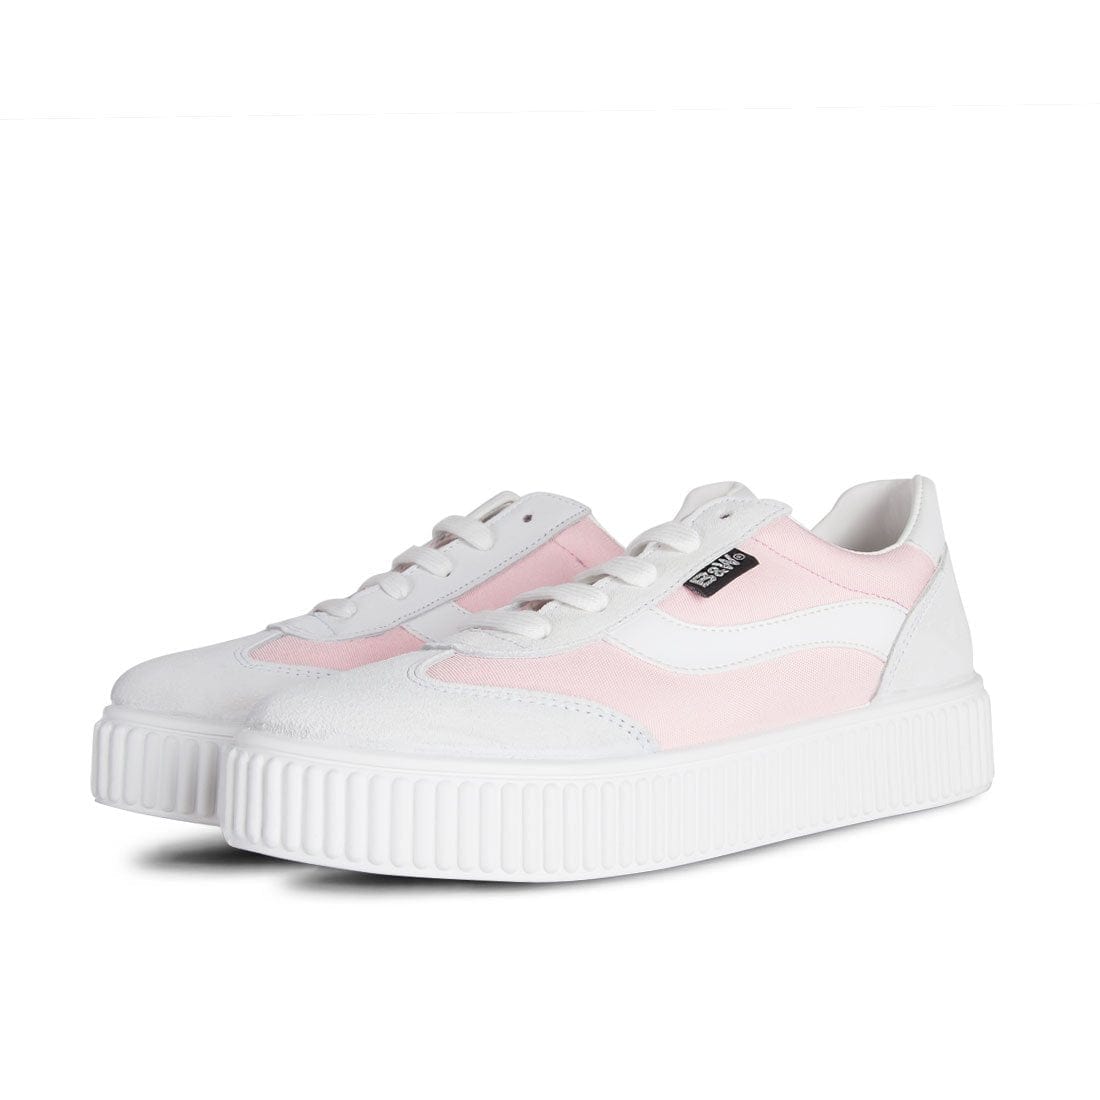 Sneakers Marty Pink